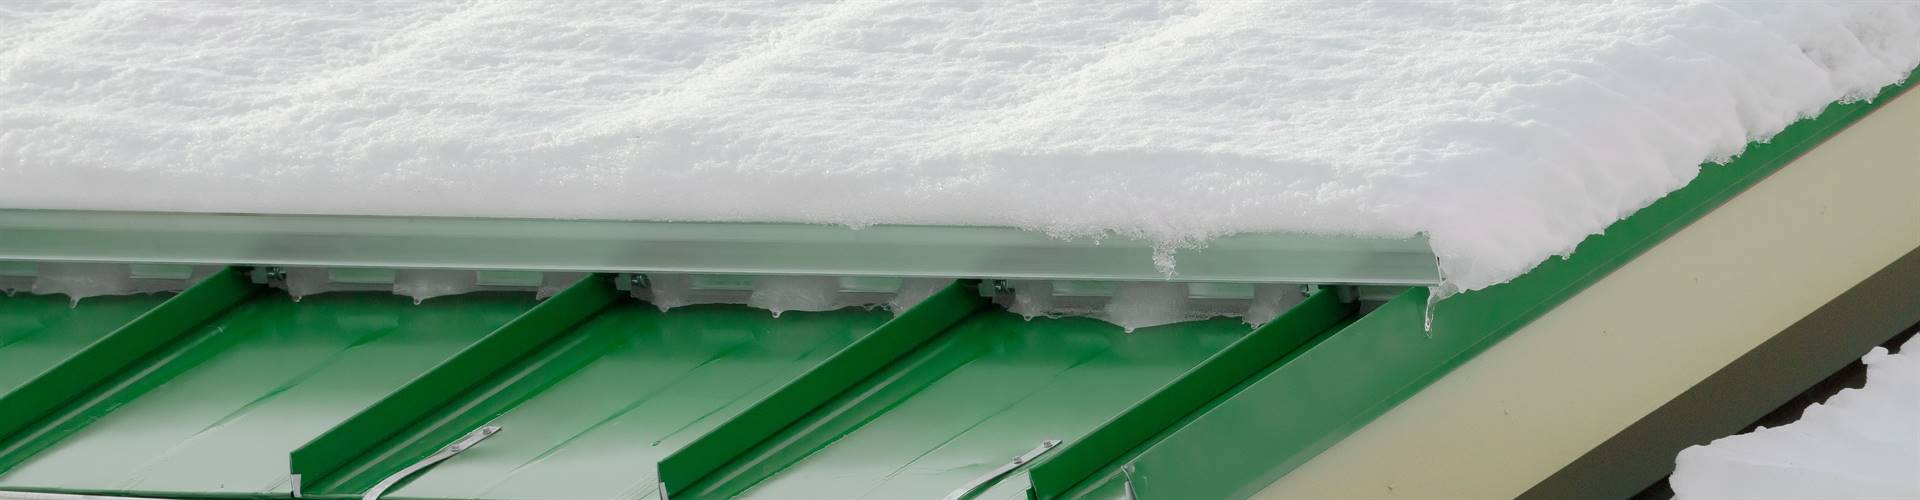 Patented snow guard design protects roofing material from damage